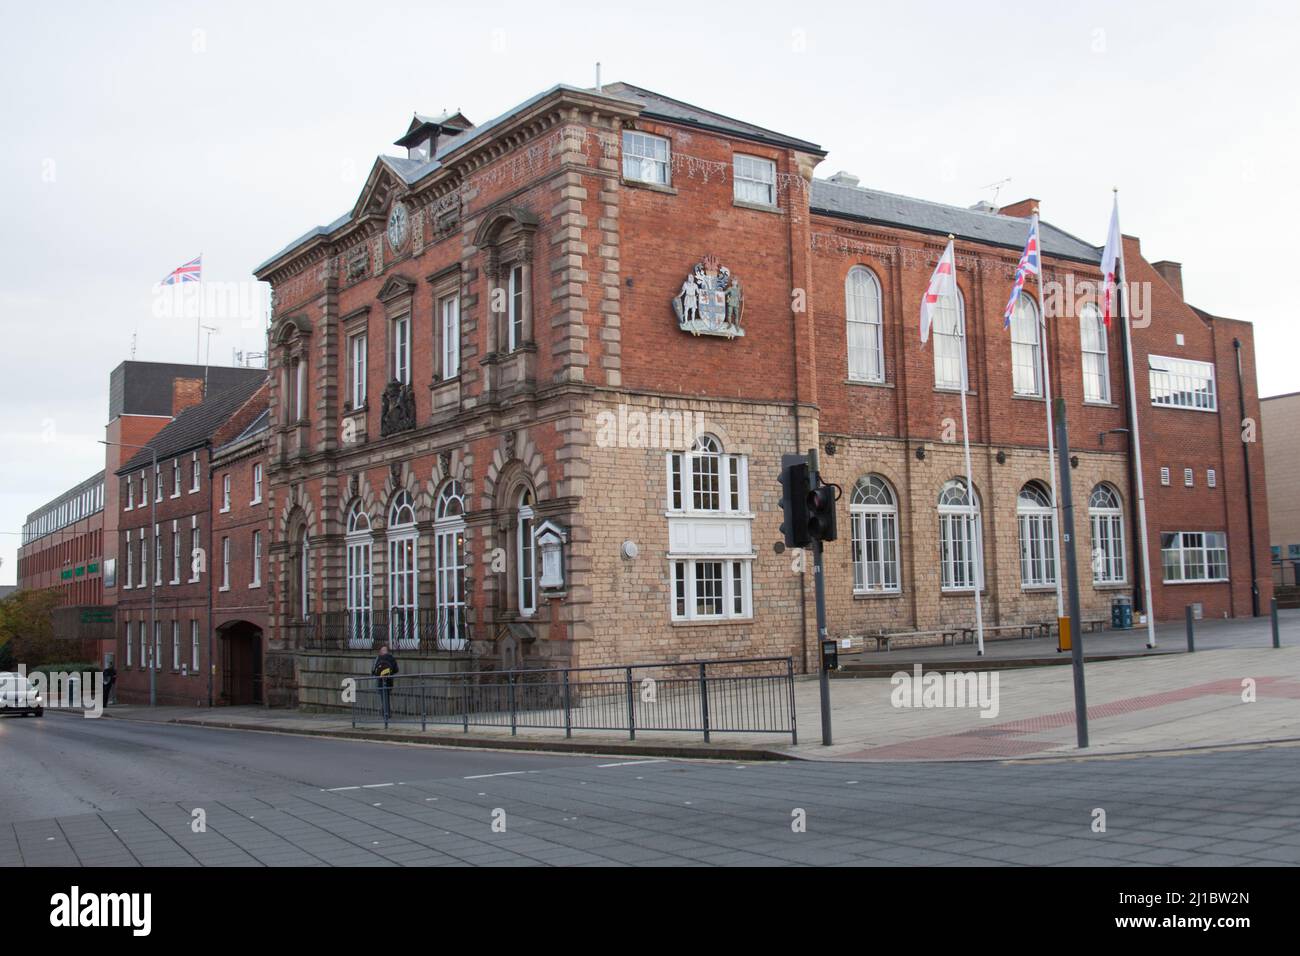 The Town Hall in Worksop, Nottinghamshire in the UK Stock Photo